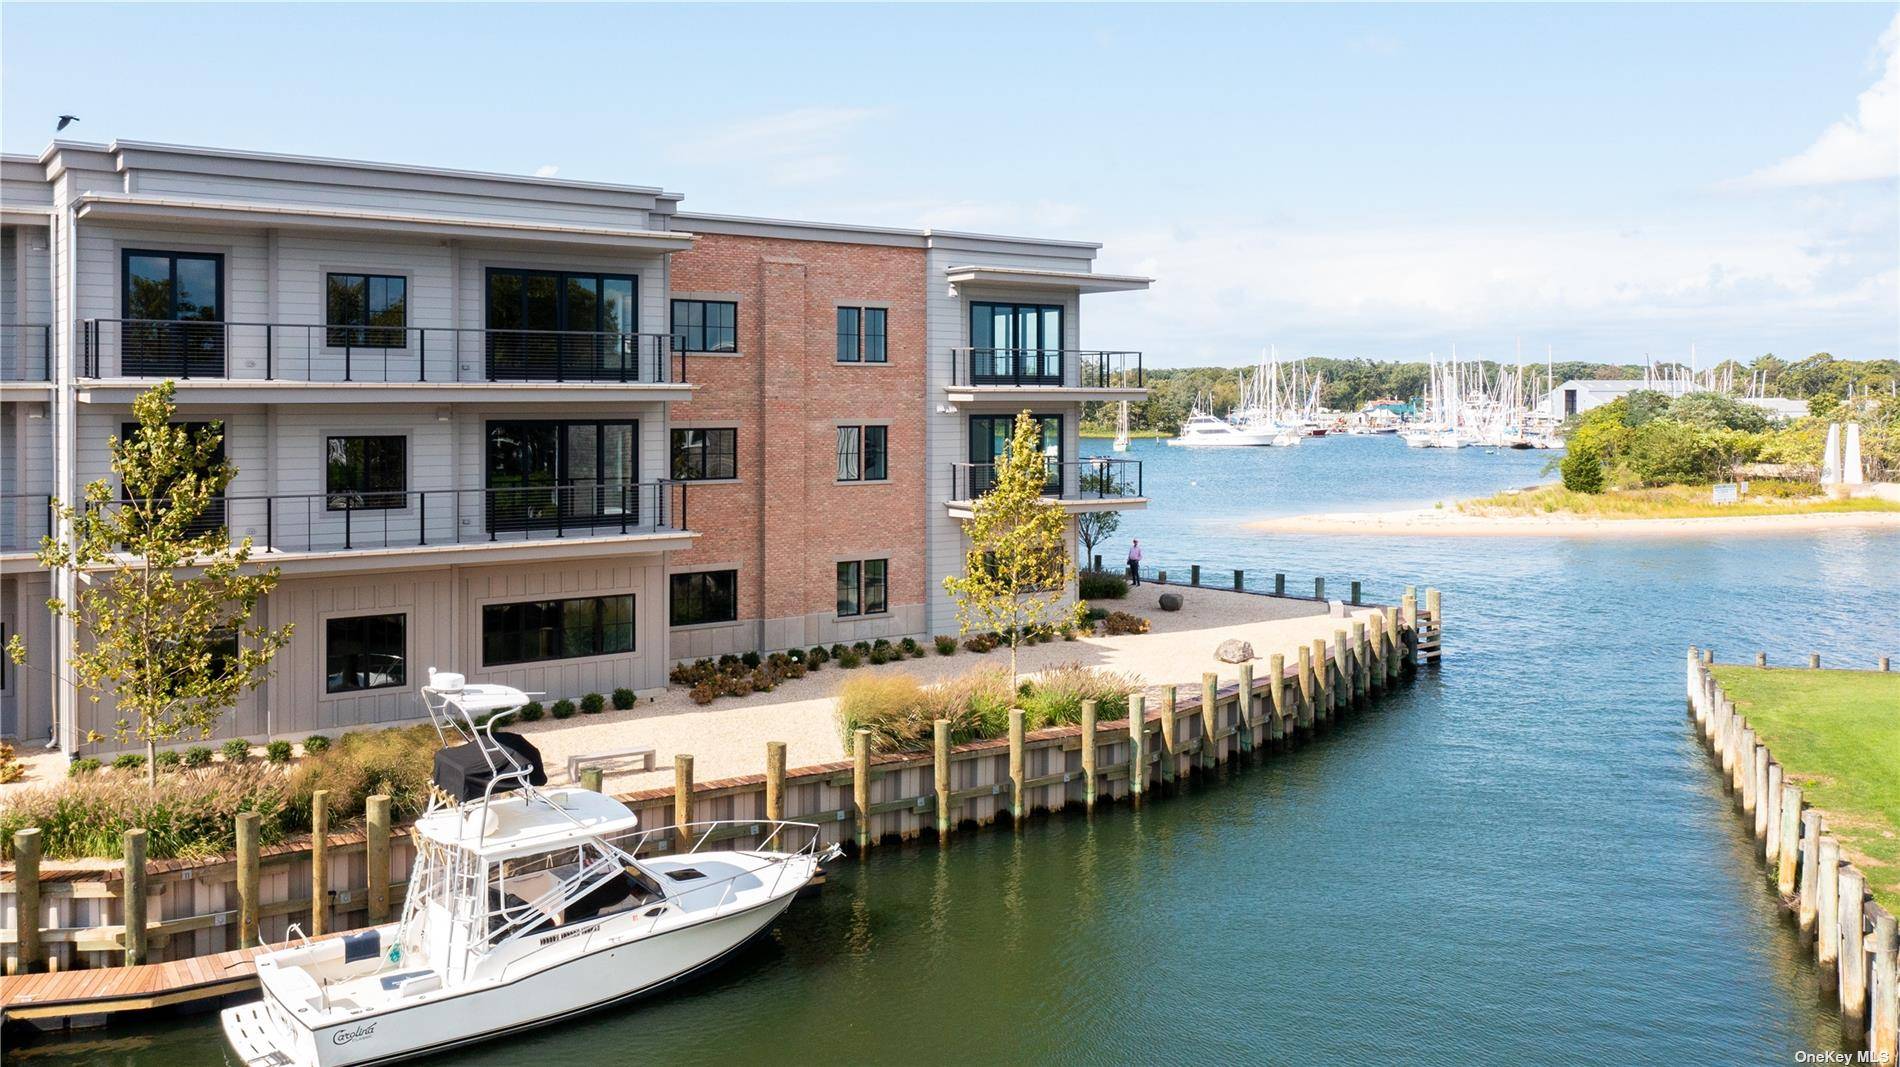 Perched above the water with expansive views of Greenport Harbor and Stirling Basin, 123 Stirling offers modern luxury on one of Greenport Village's most beautiful residential streets.